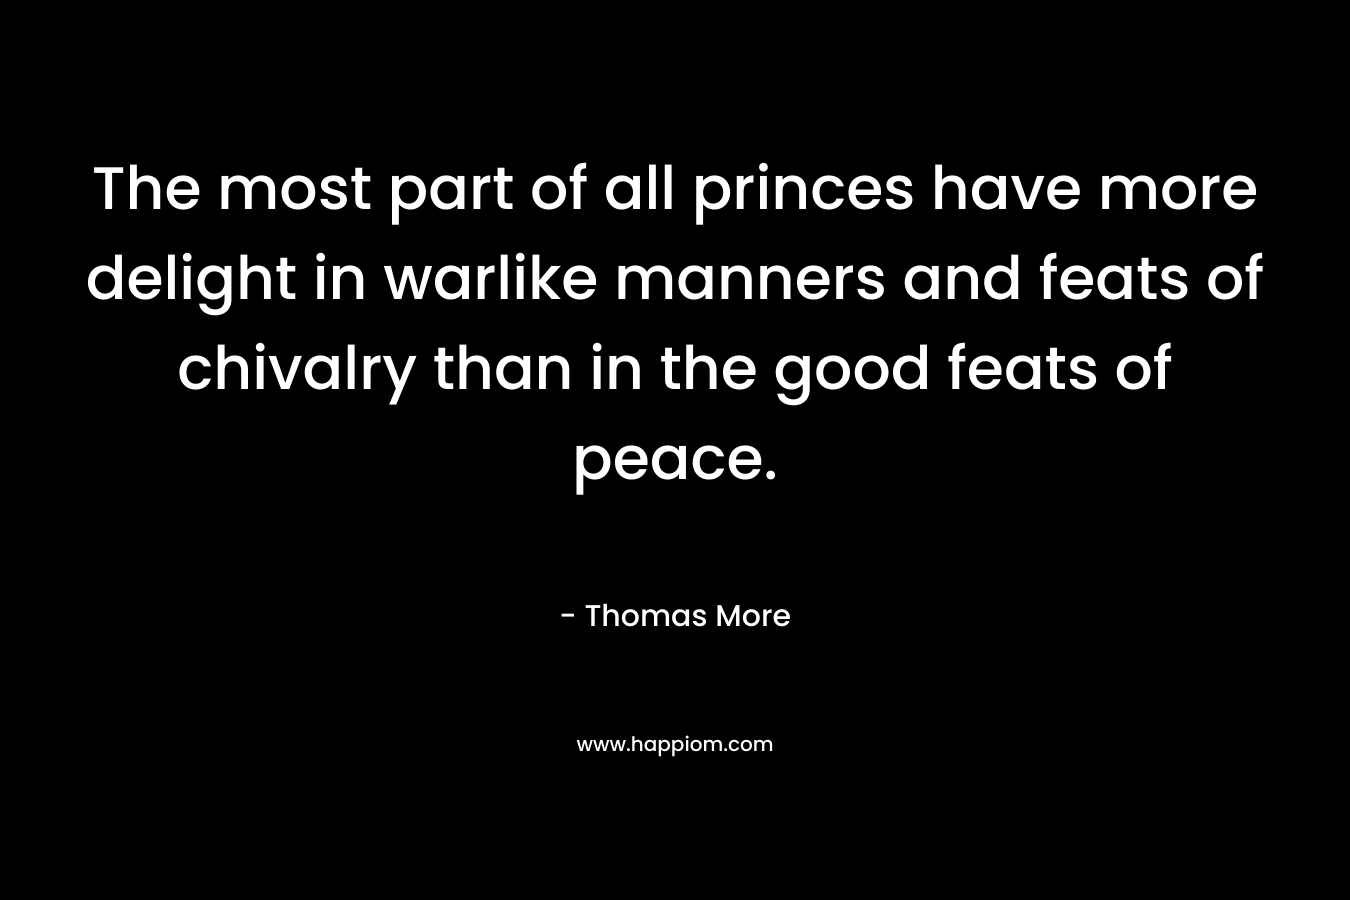 The most part of all princes have more delight in warlike manners and feats of chivalry than in the good feats of peace.